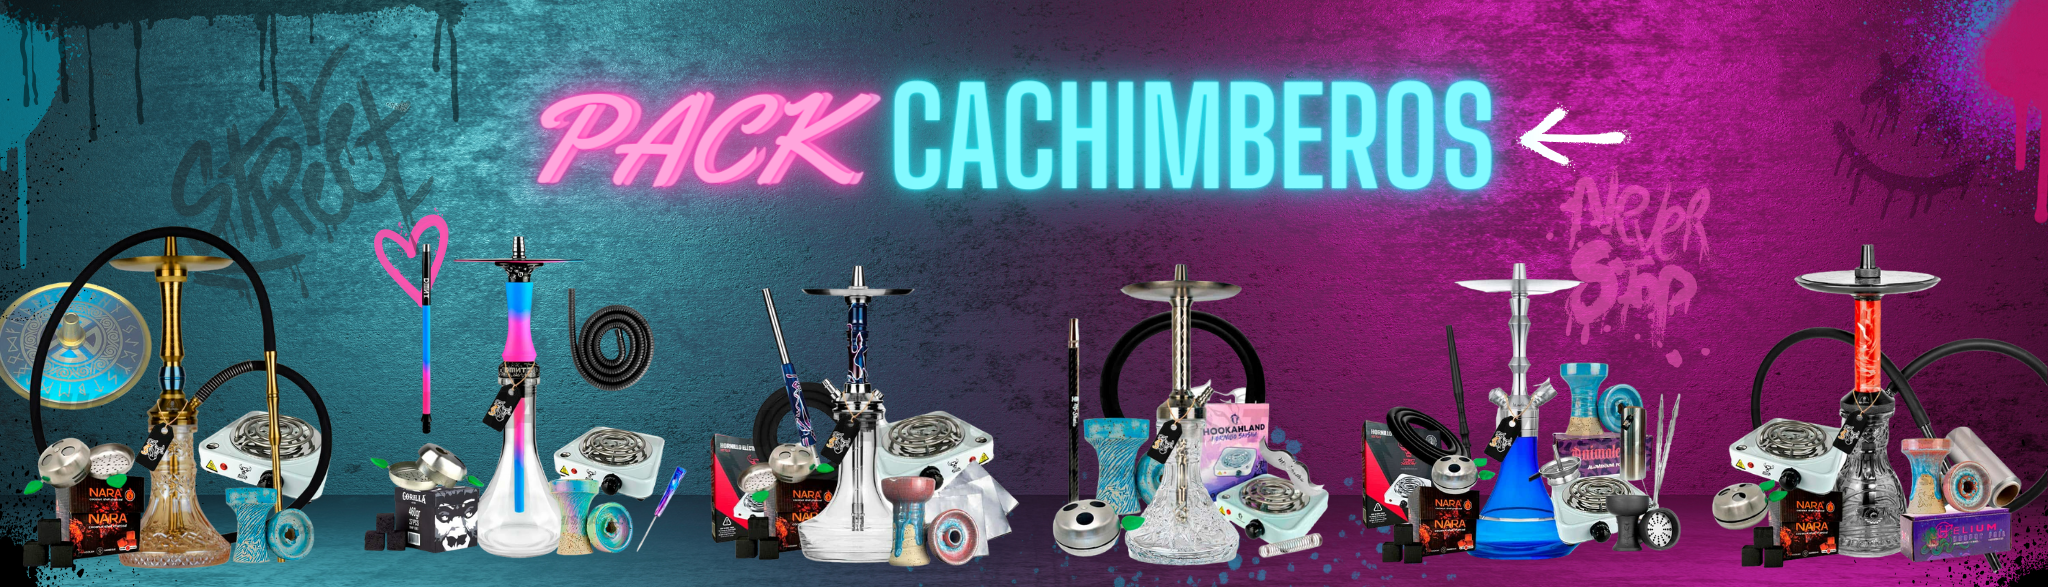 BANNER WEB PACK CACHIMBAS PC